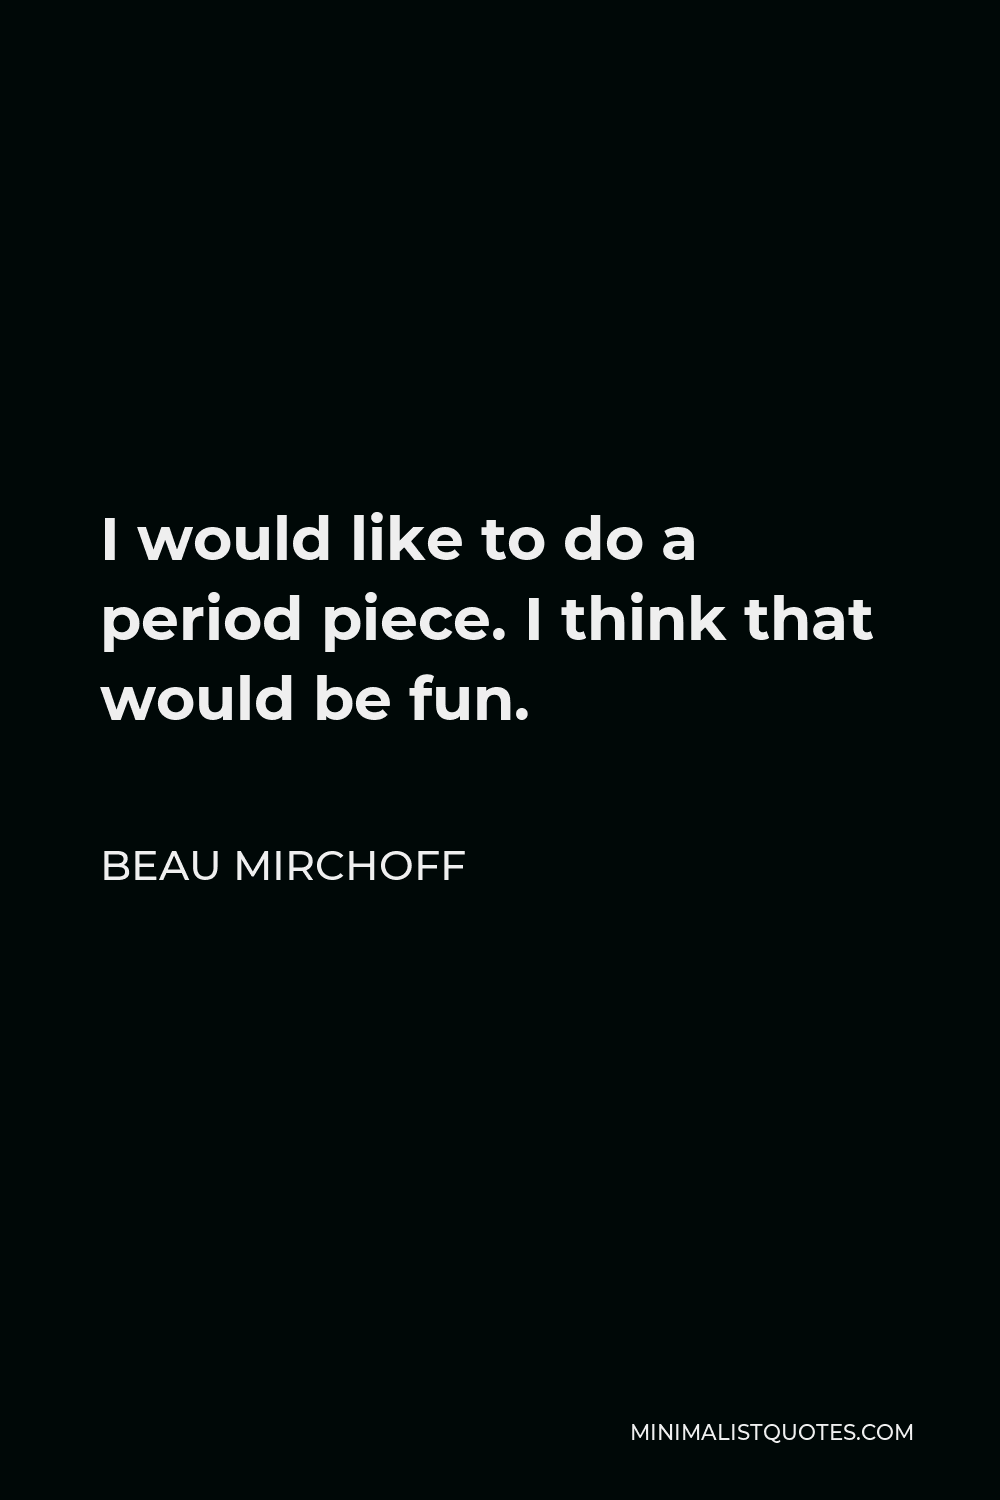 Beau Mirchoff Quote - I would like to do a period piece. I think that would be fun.